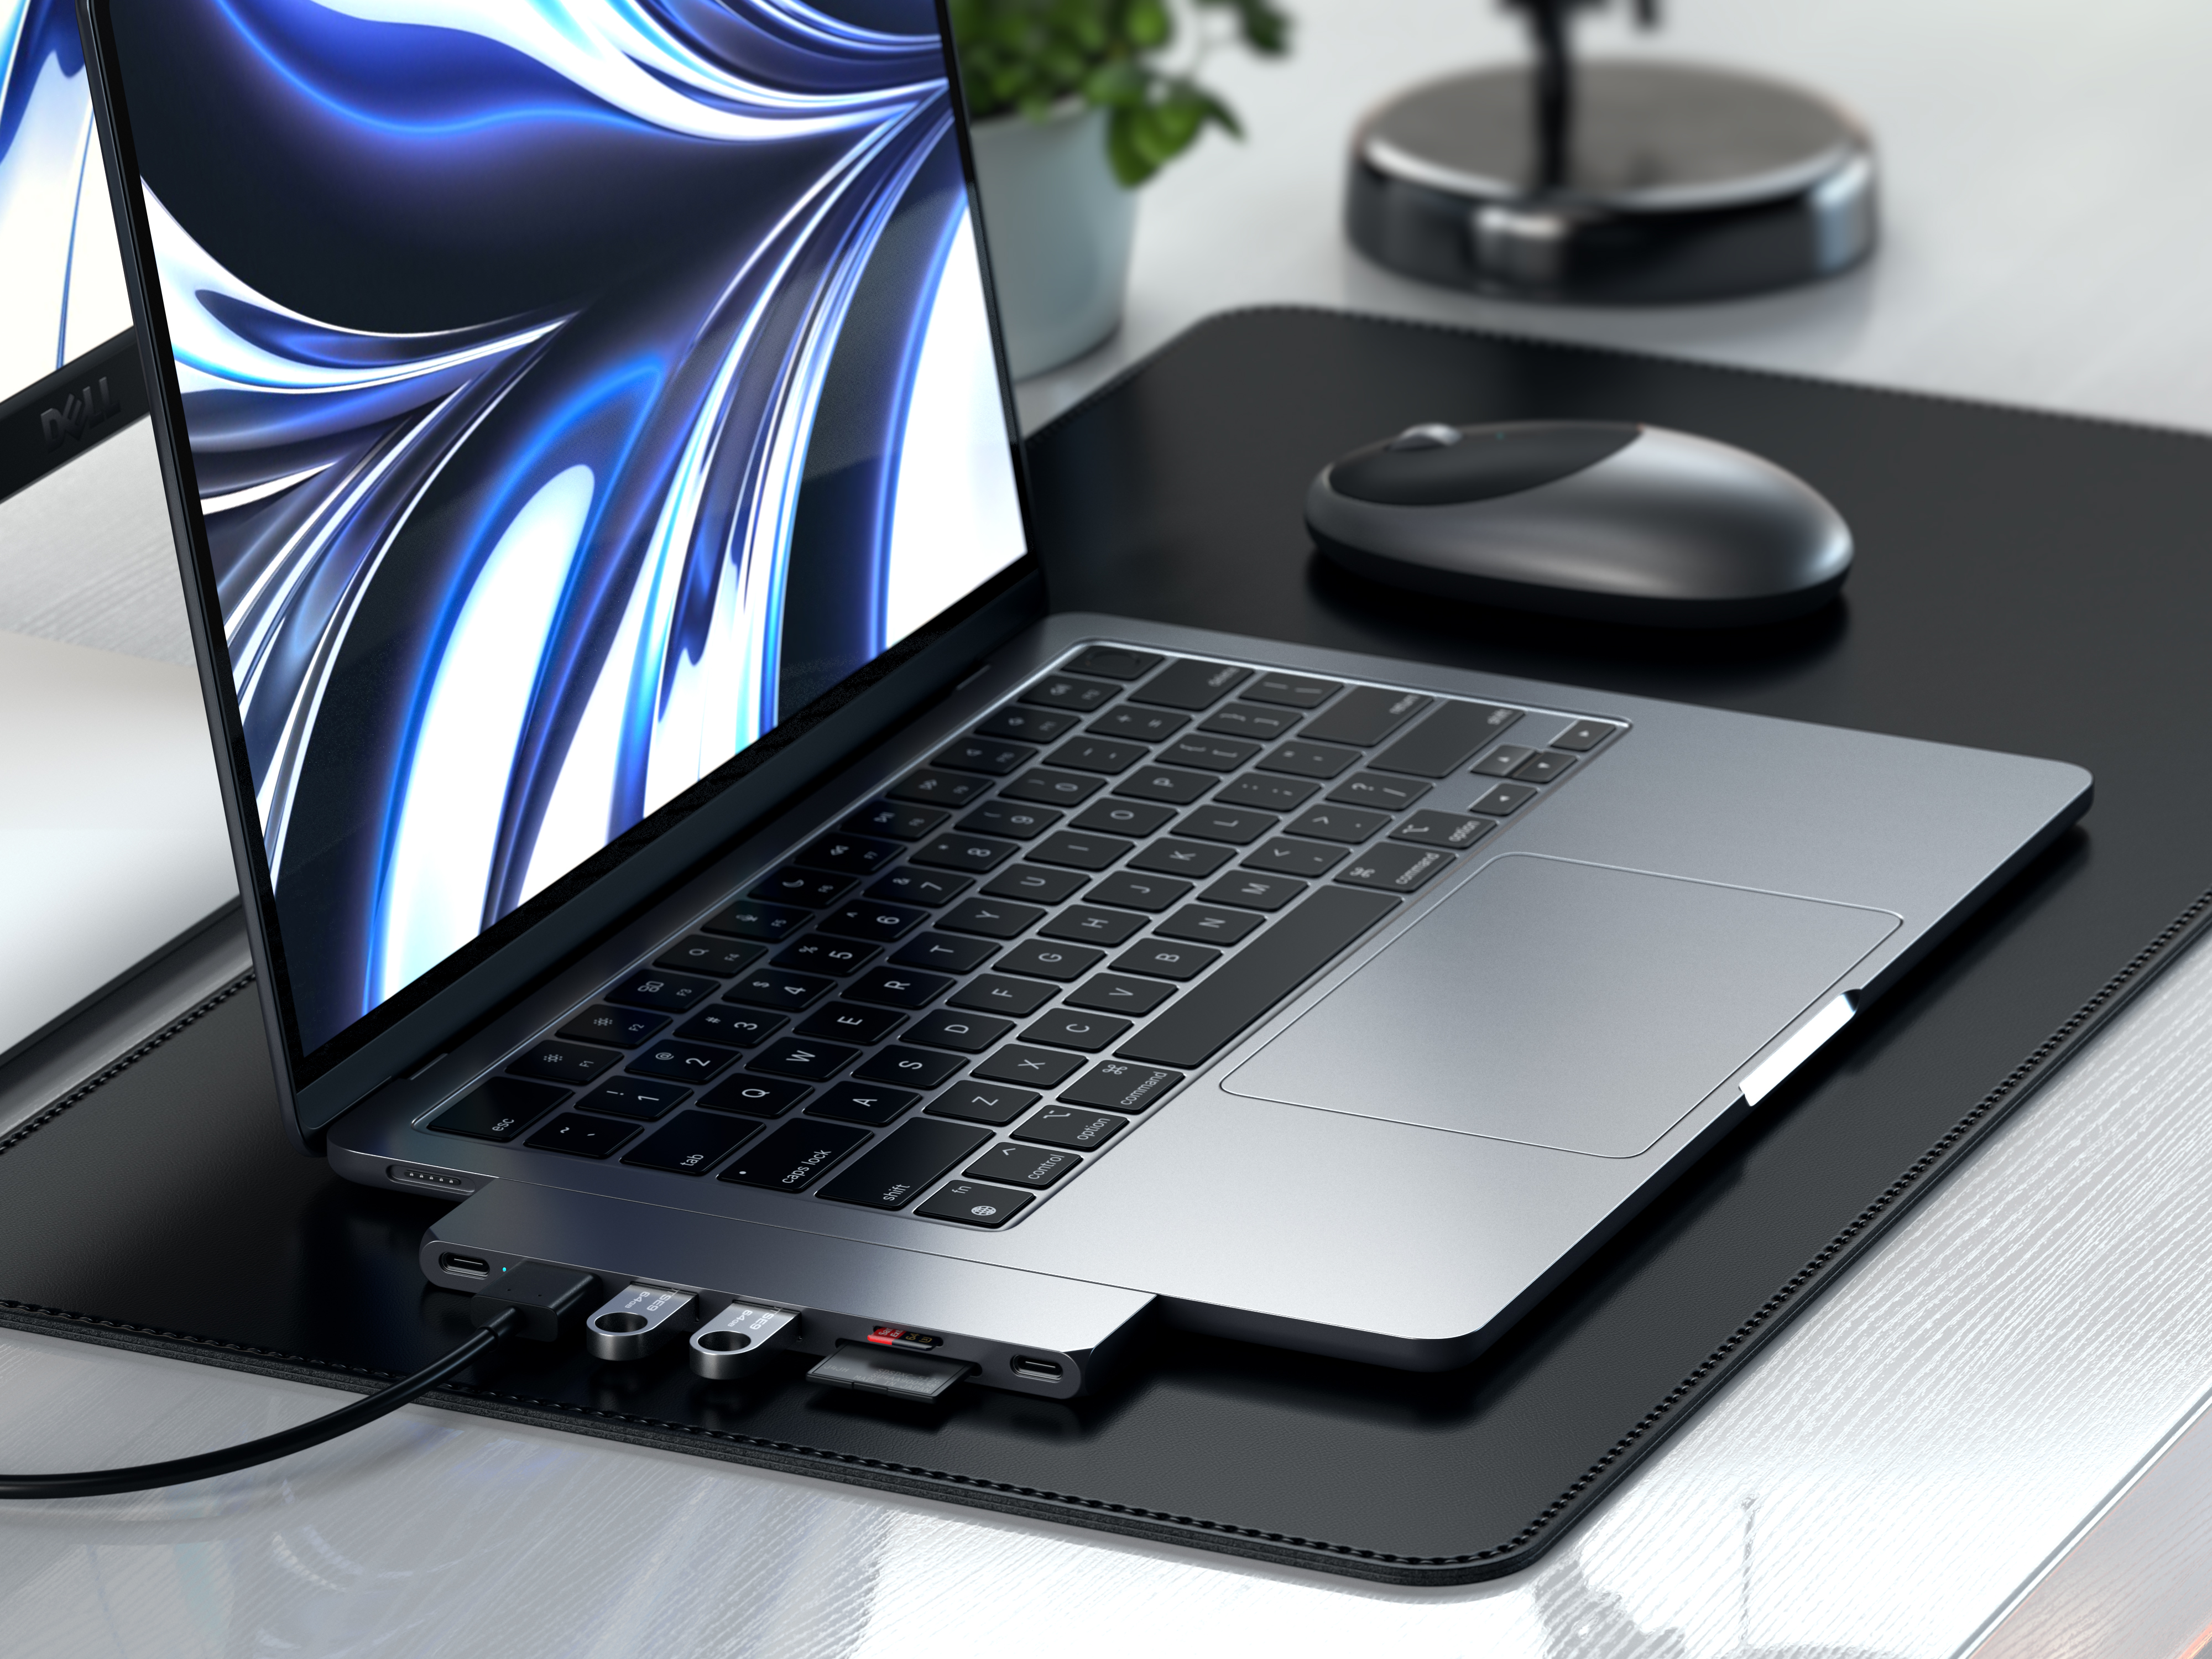 Satechi launches new color-matched Pro Slim Hub for latest USB-C MacBooks